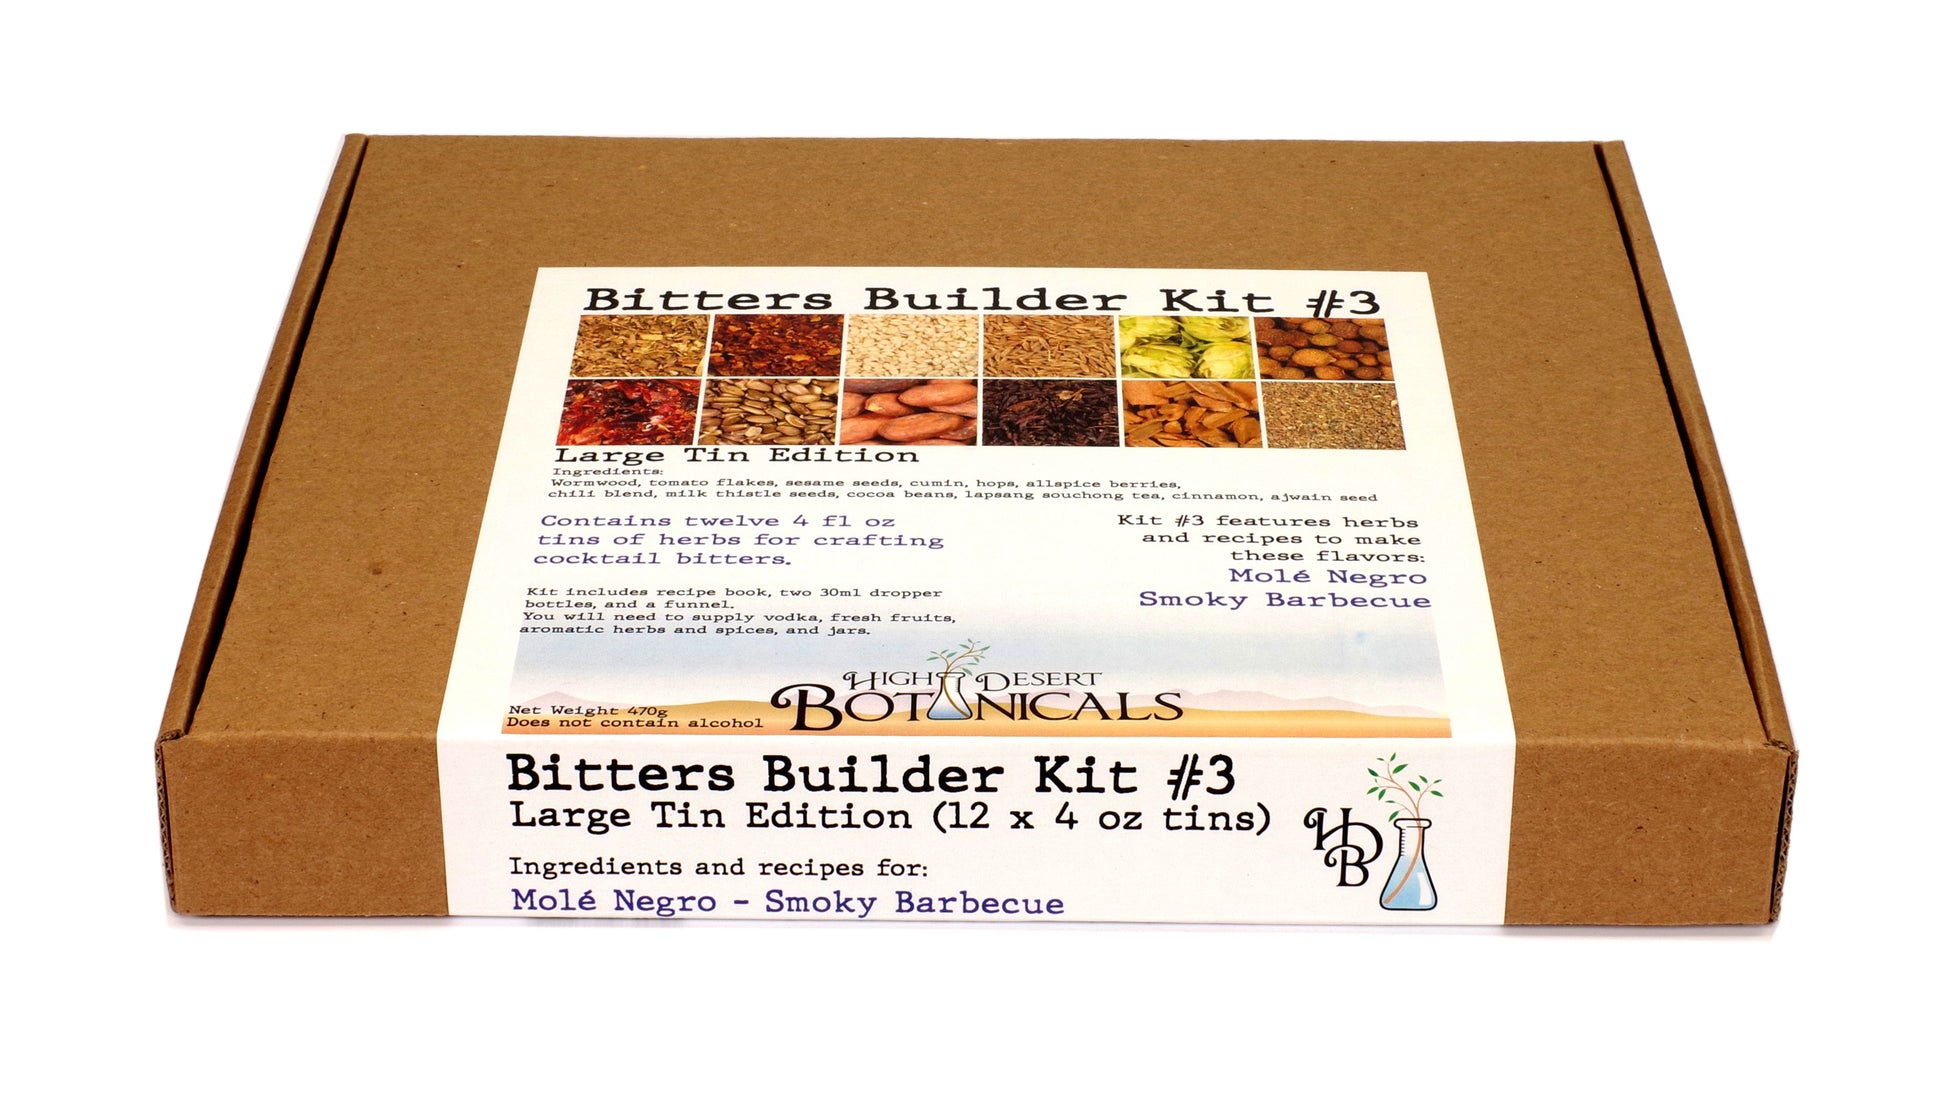 Bitters Builder Kit #3 - Mole Negro & Smoky Barbecue